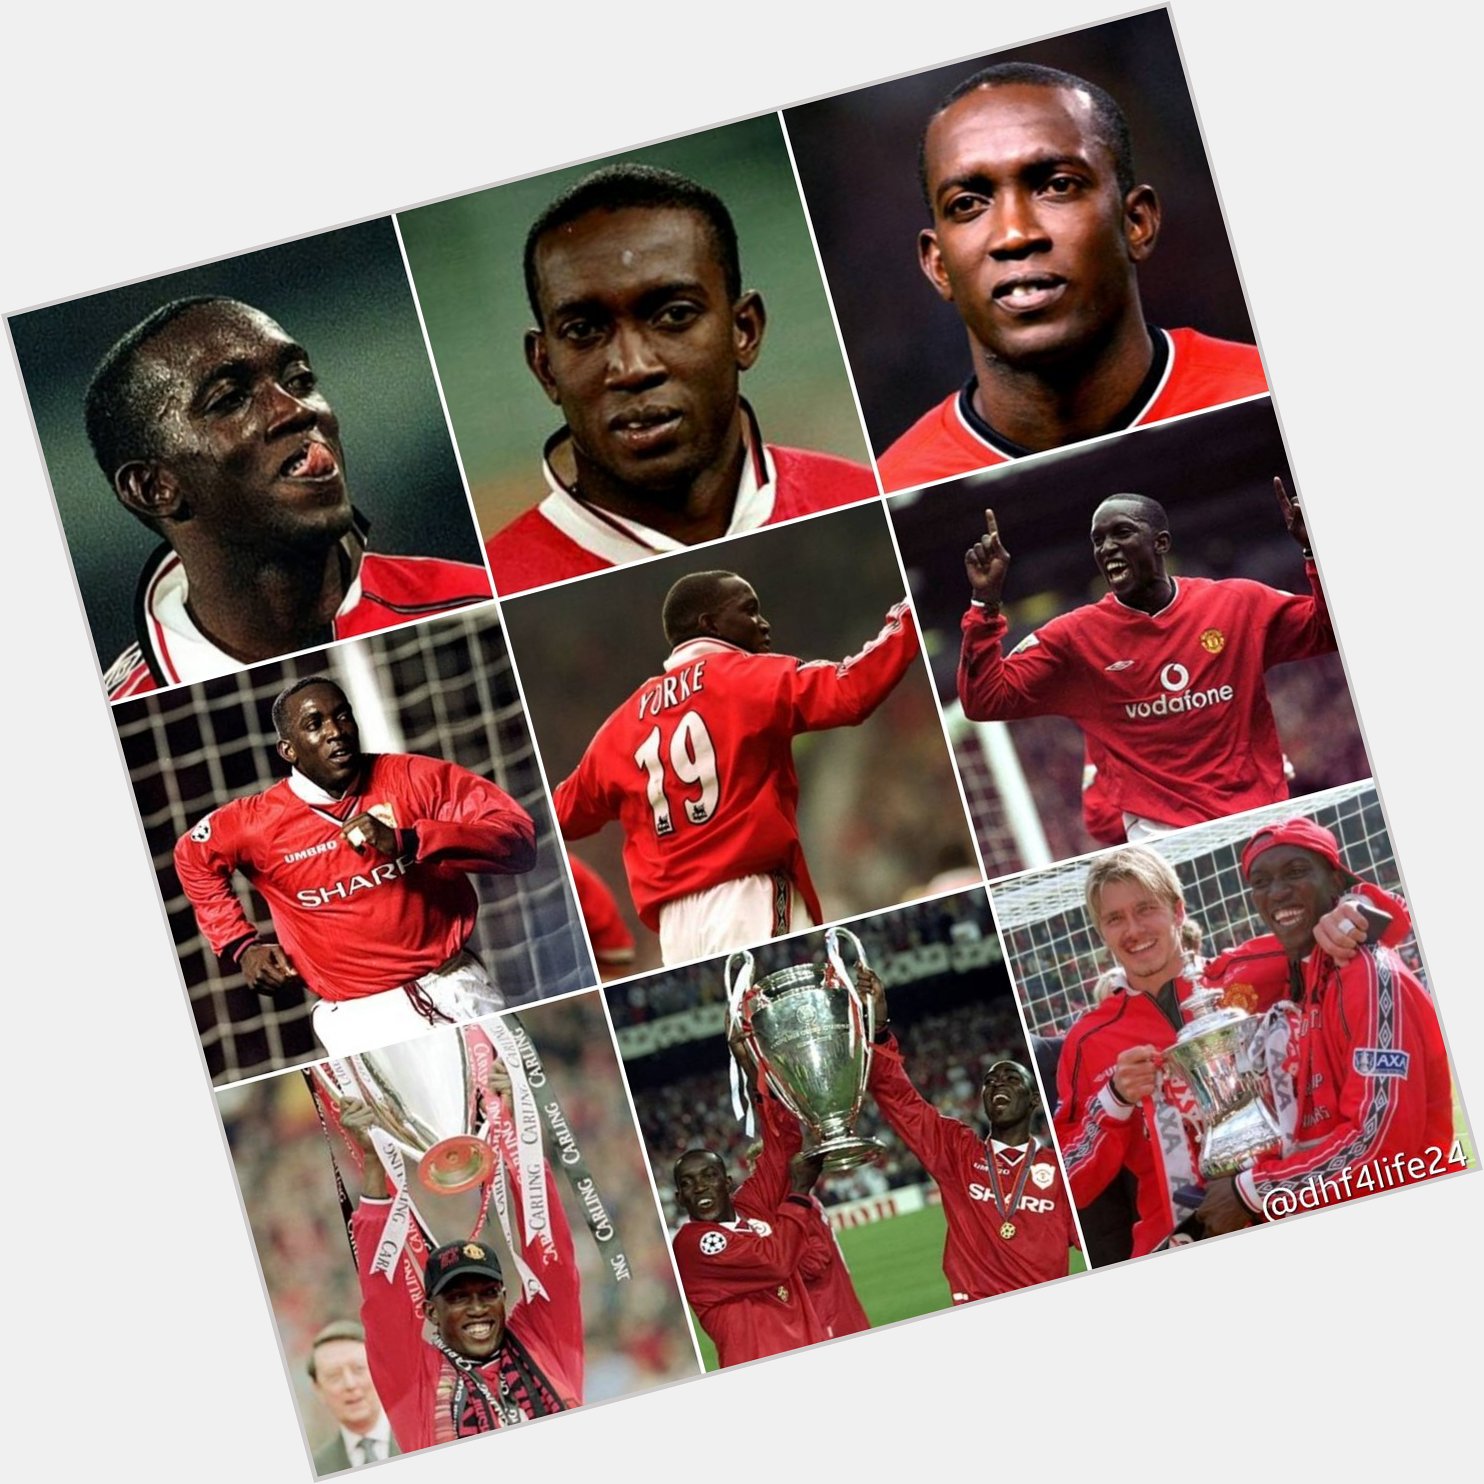 Happy 51st Birthday   on 03rd November 2022 to Dwight Yorke - What a Player and LEGEND... 